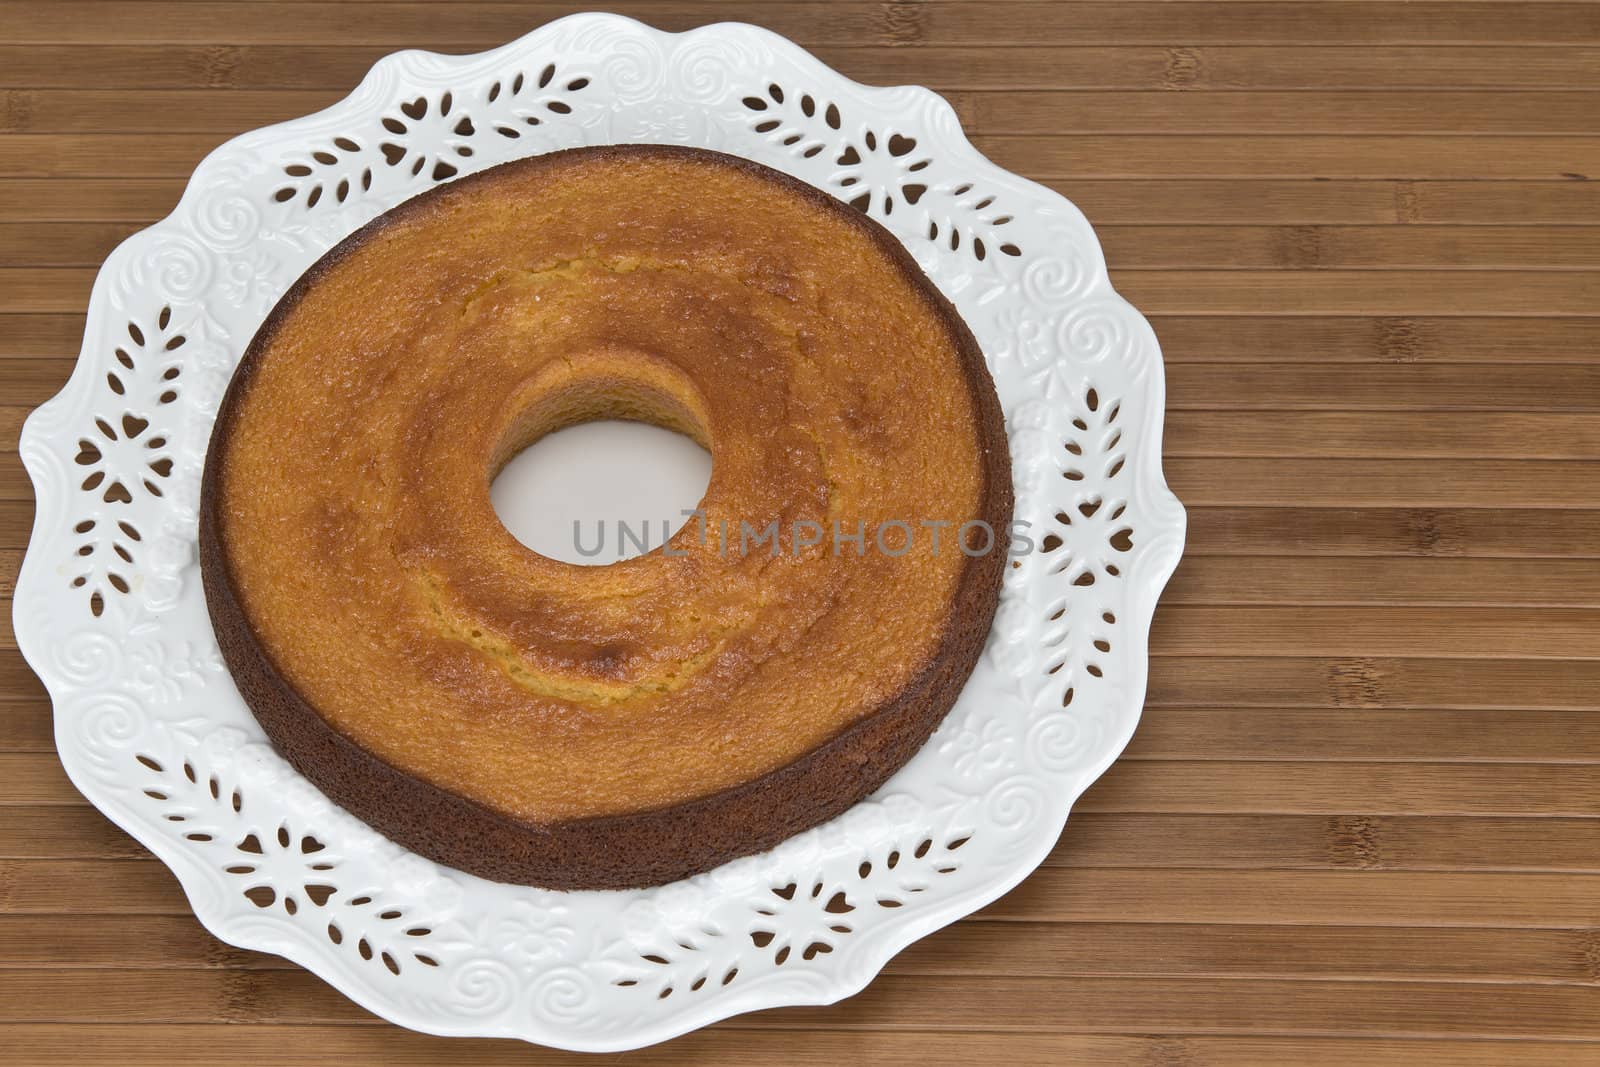 A plate with a homemade cake on a wooden surface.